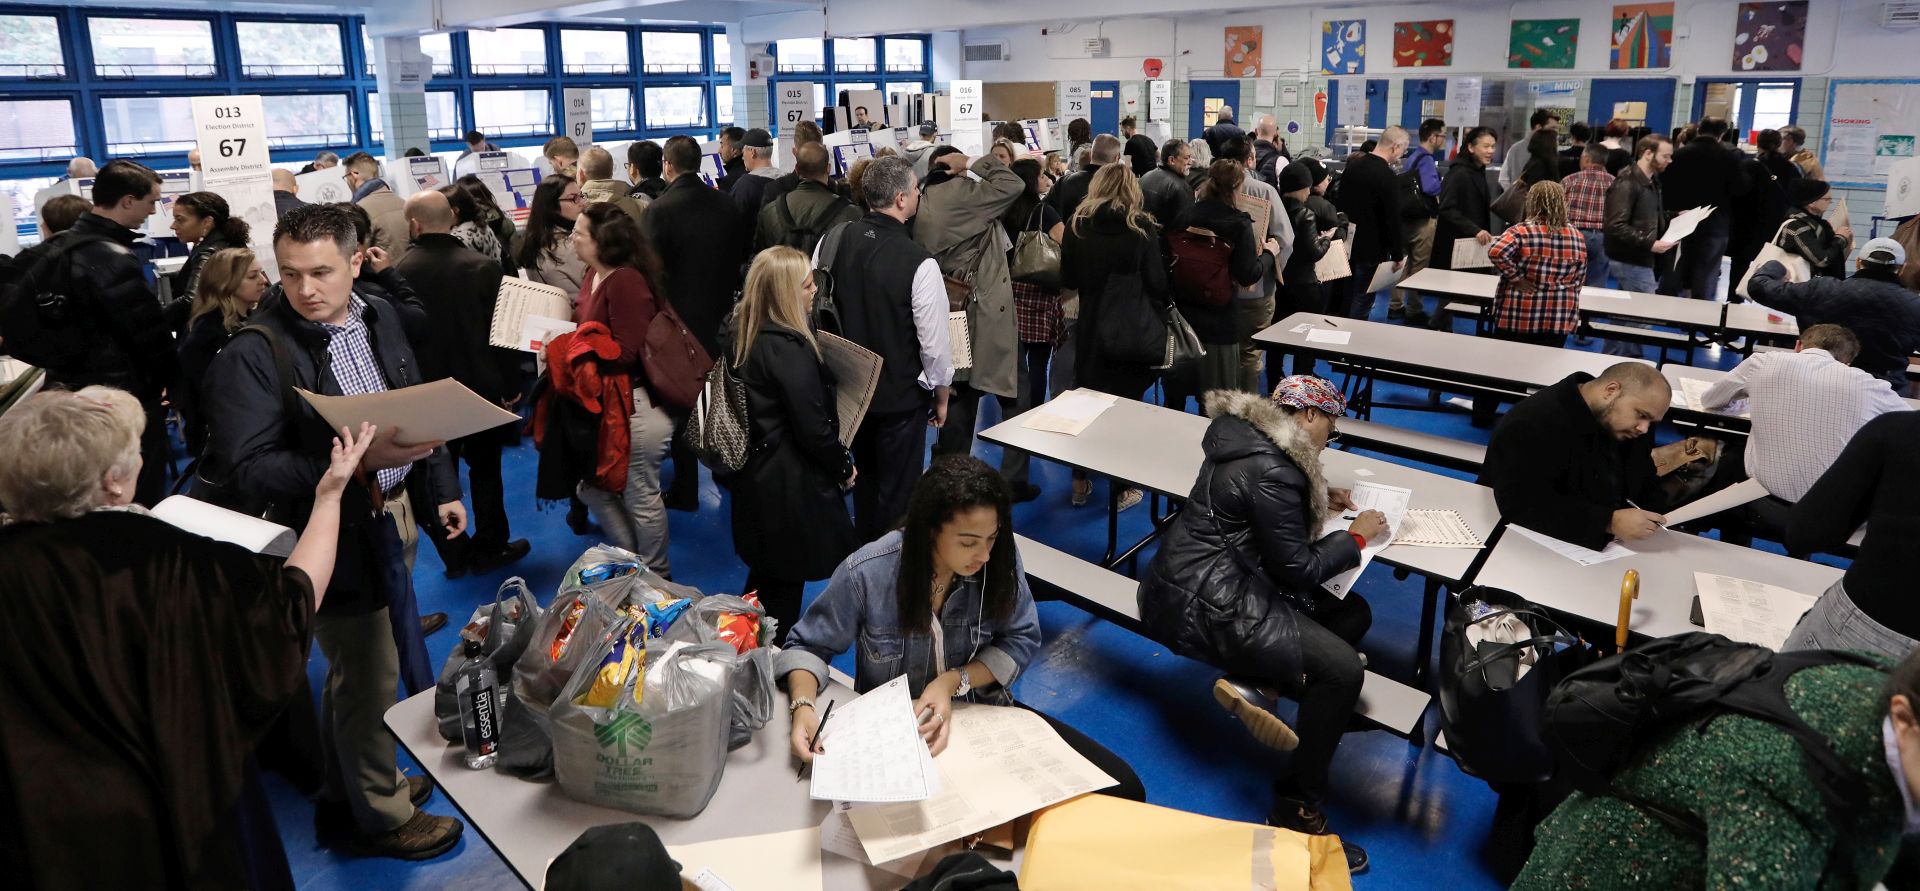 epa07145665 New York City voters queue up to cast their ballots in the 2018 midterm election at Public School 111 on Manhattan's west side in New York, New York, USA, 06 November 2018. Voters across the nation are selecting who will represent them on local, state and national levels.  EPA/PETER FOLEY